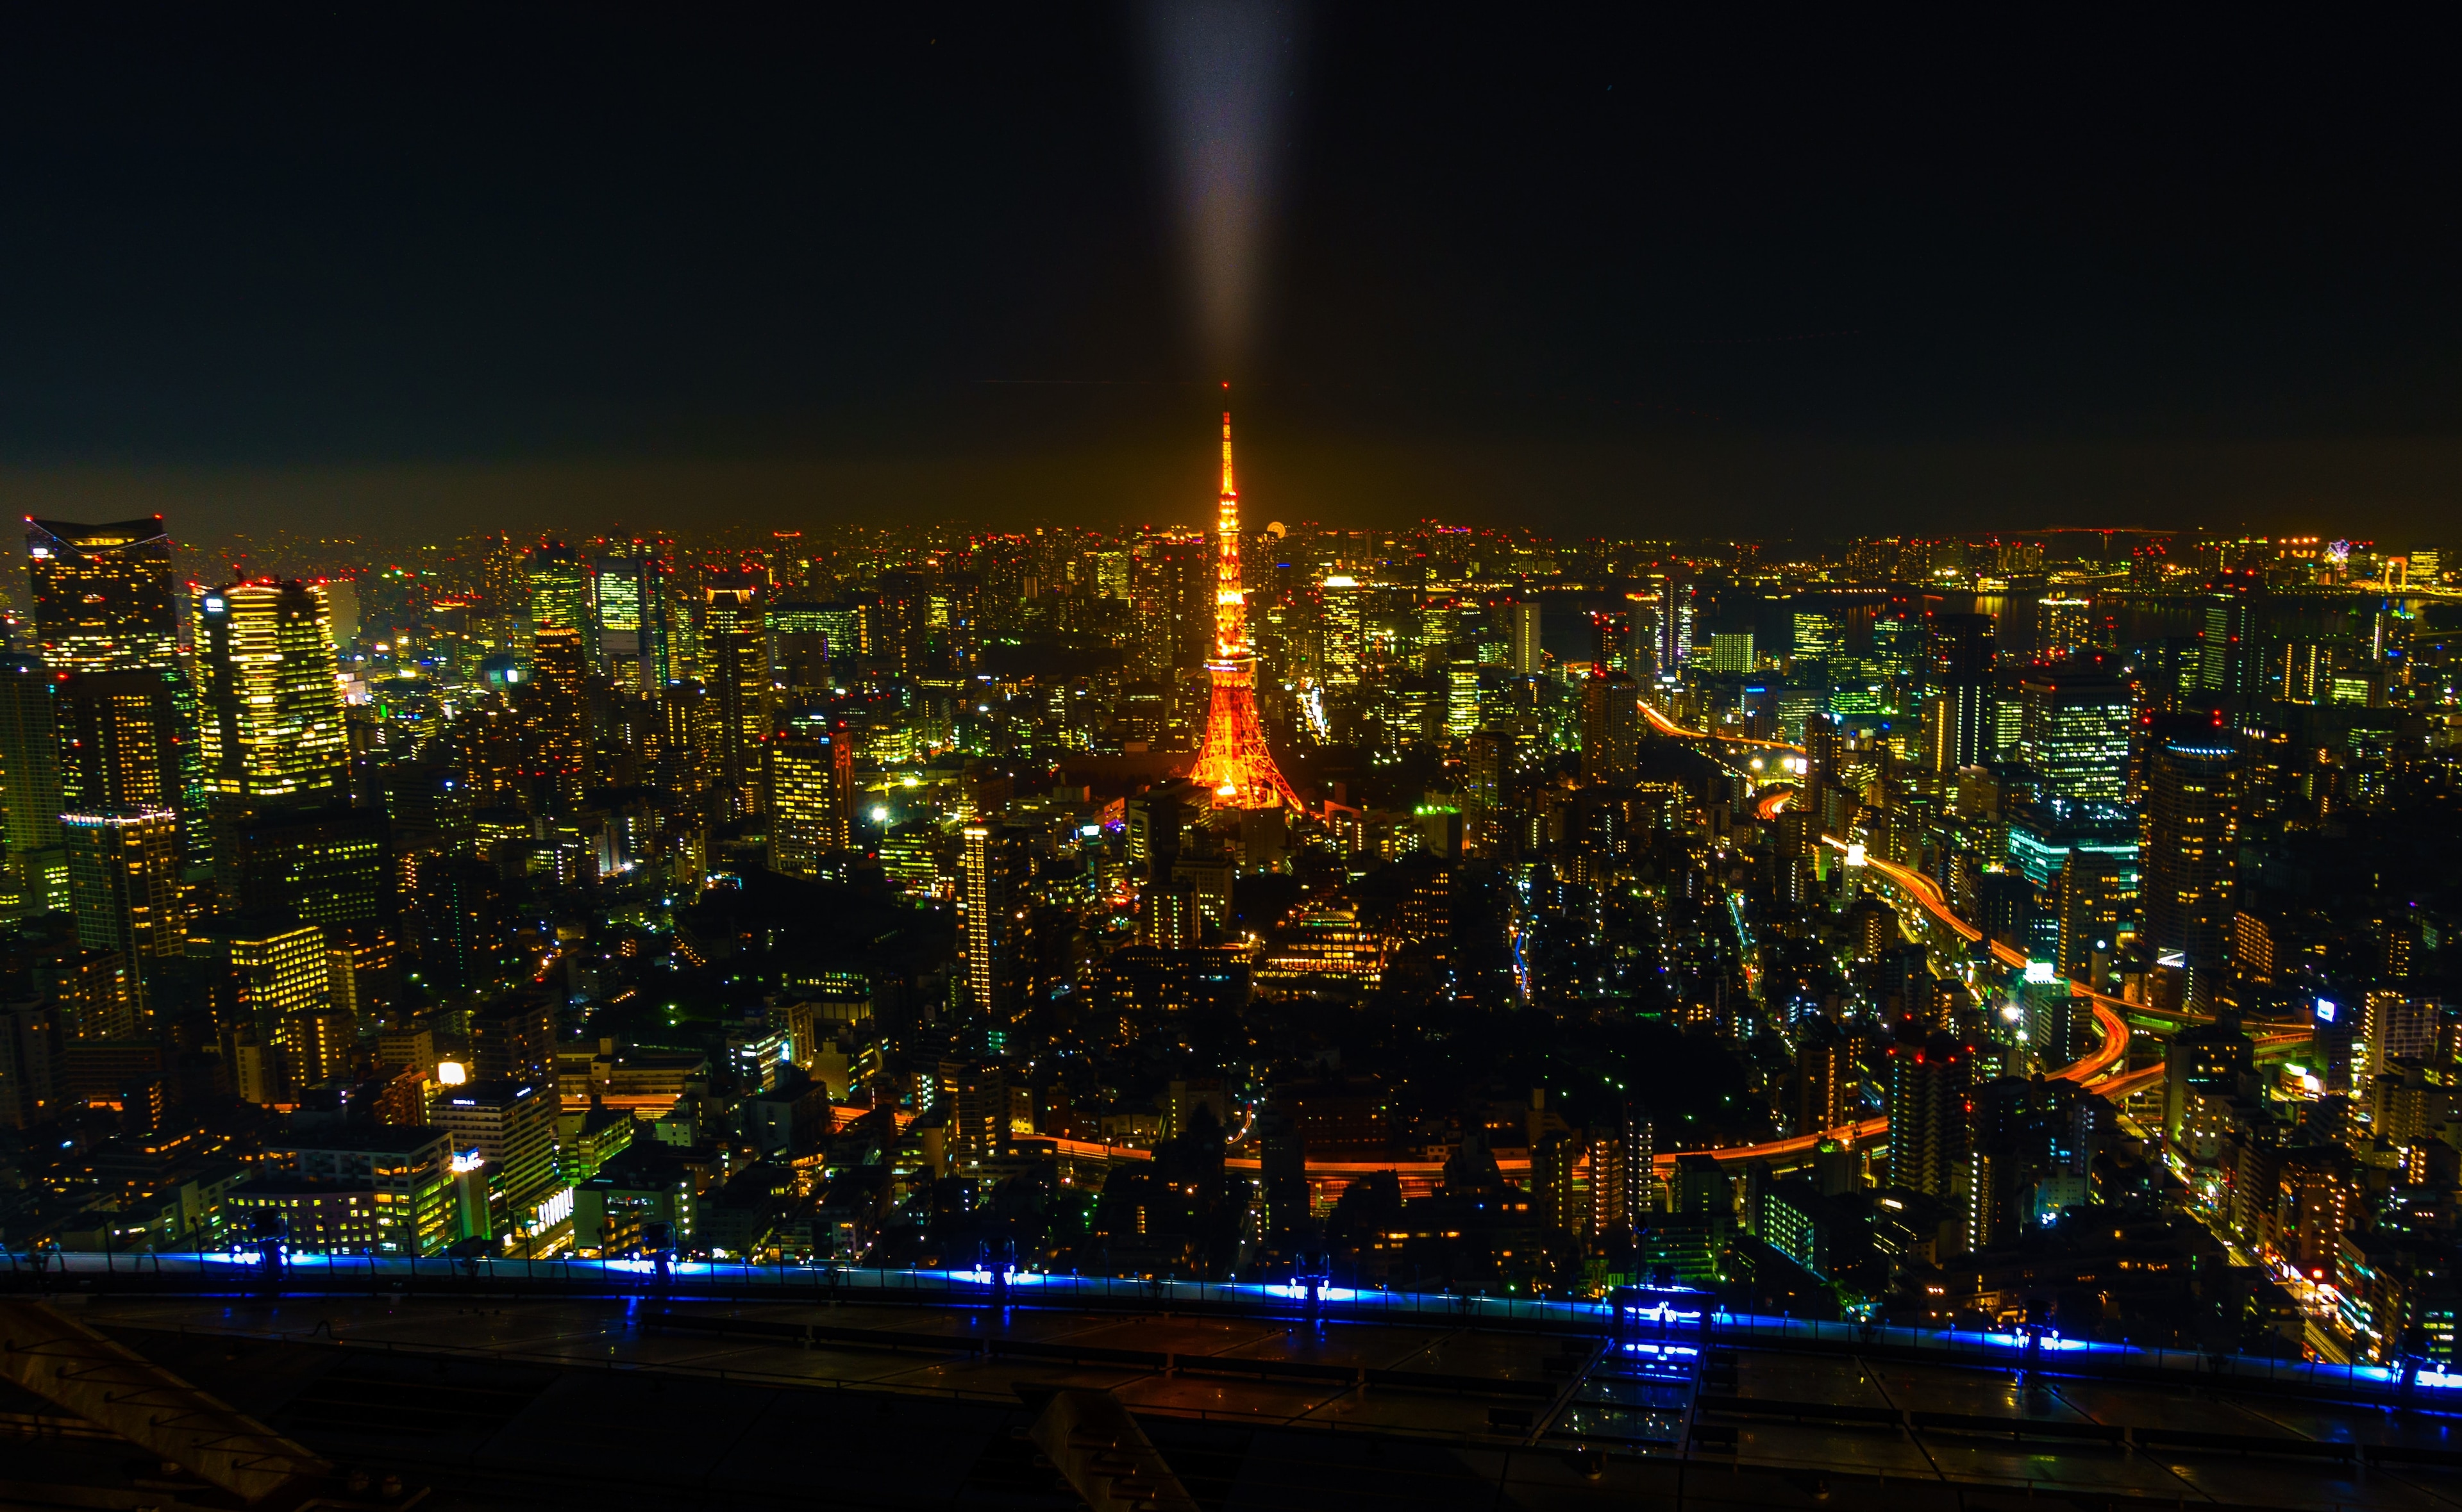 Have You Ever Experienced the Tokyo Skytree?